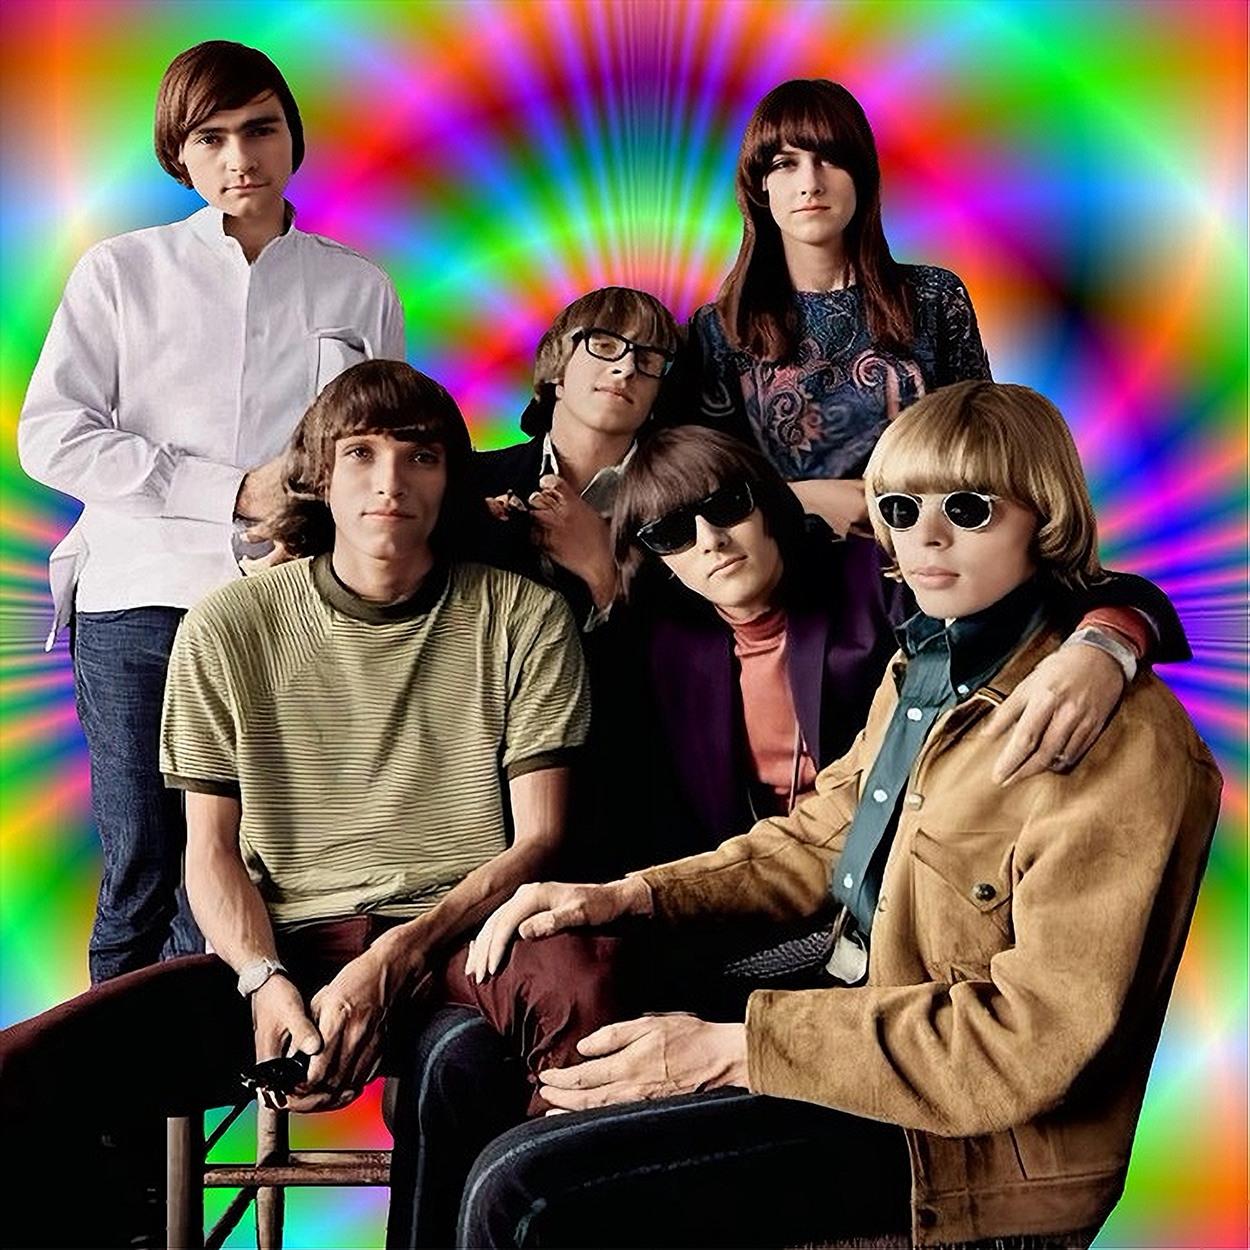 JeffersonAirplane1967Livecollection (2).png